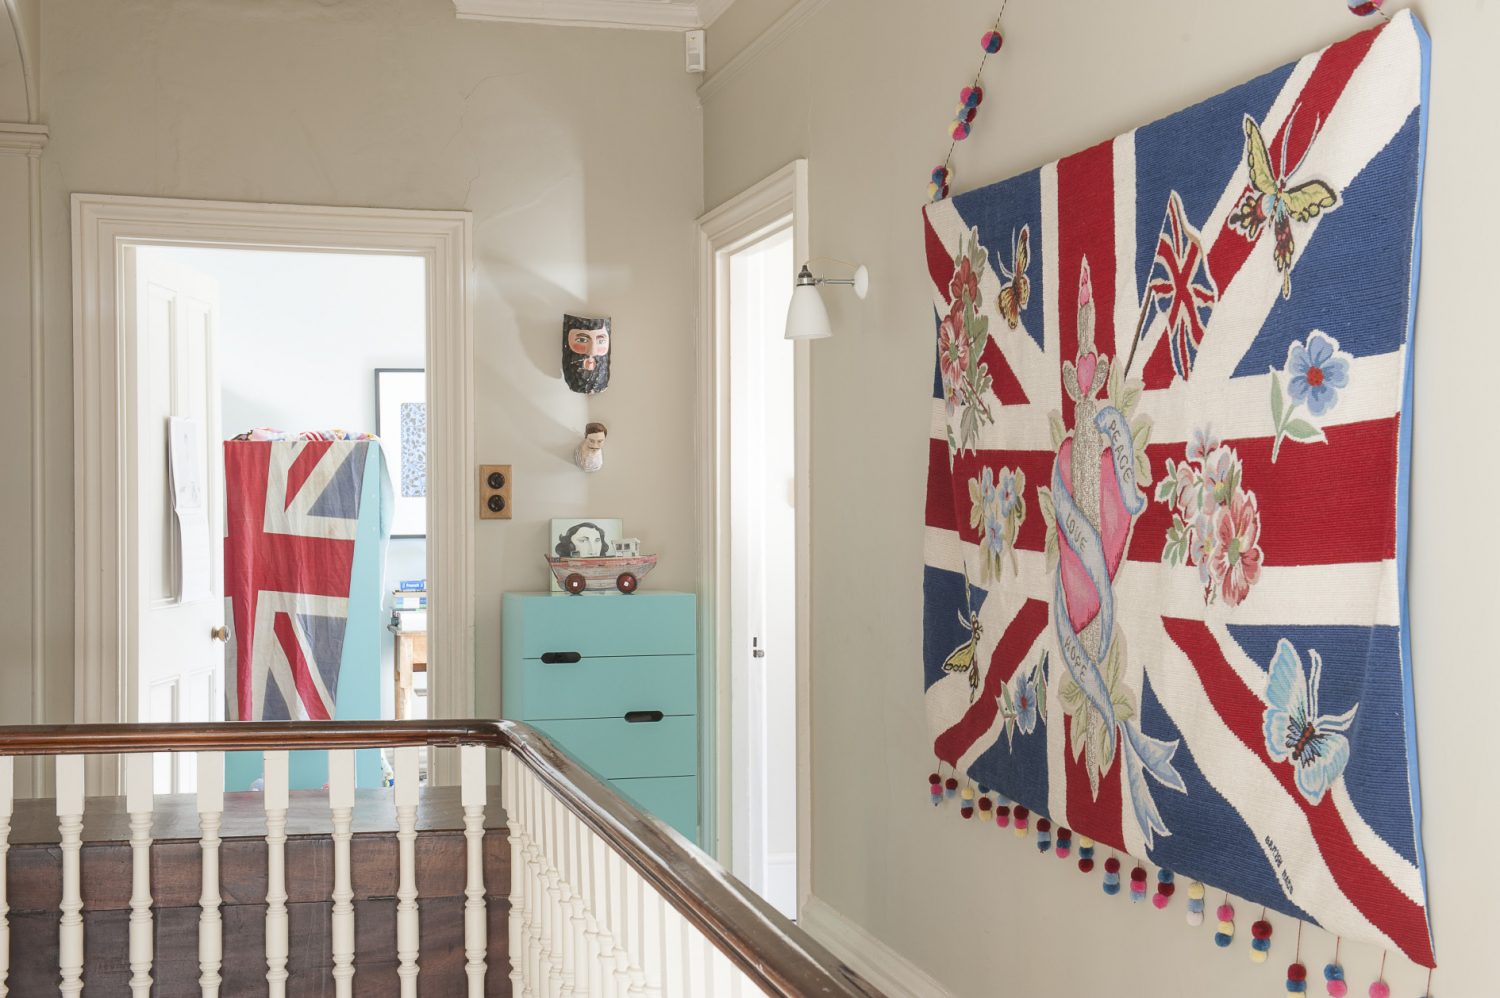 A giant embroidered and beaded Union Jack tapestry hangs boldly on one wall, whilst a comfy armchair is placed next to a set of full-to-bursting bookshelves